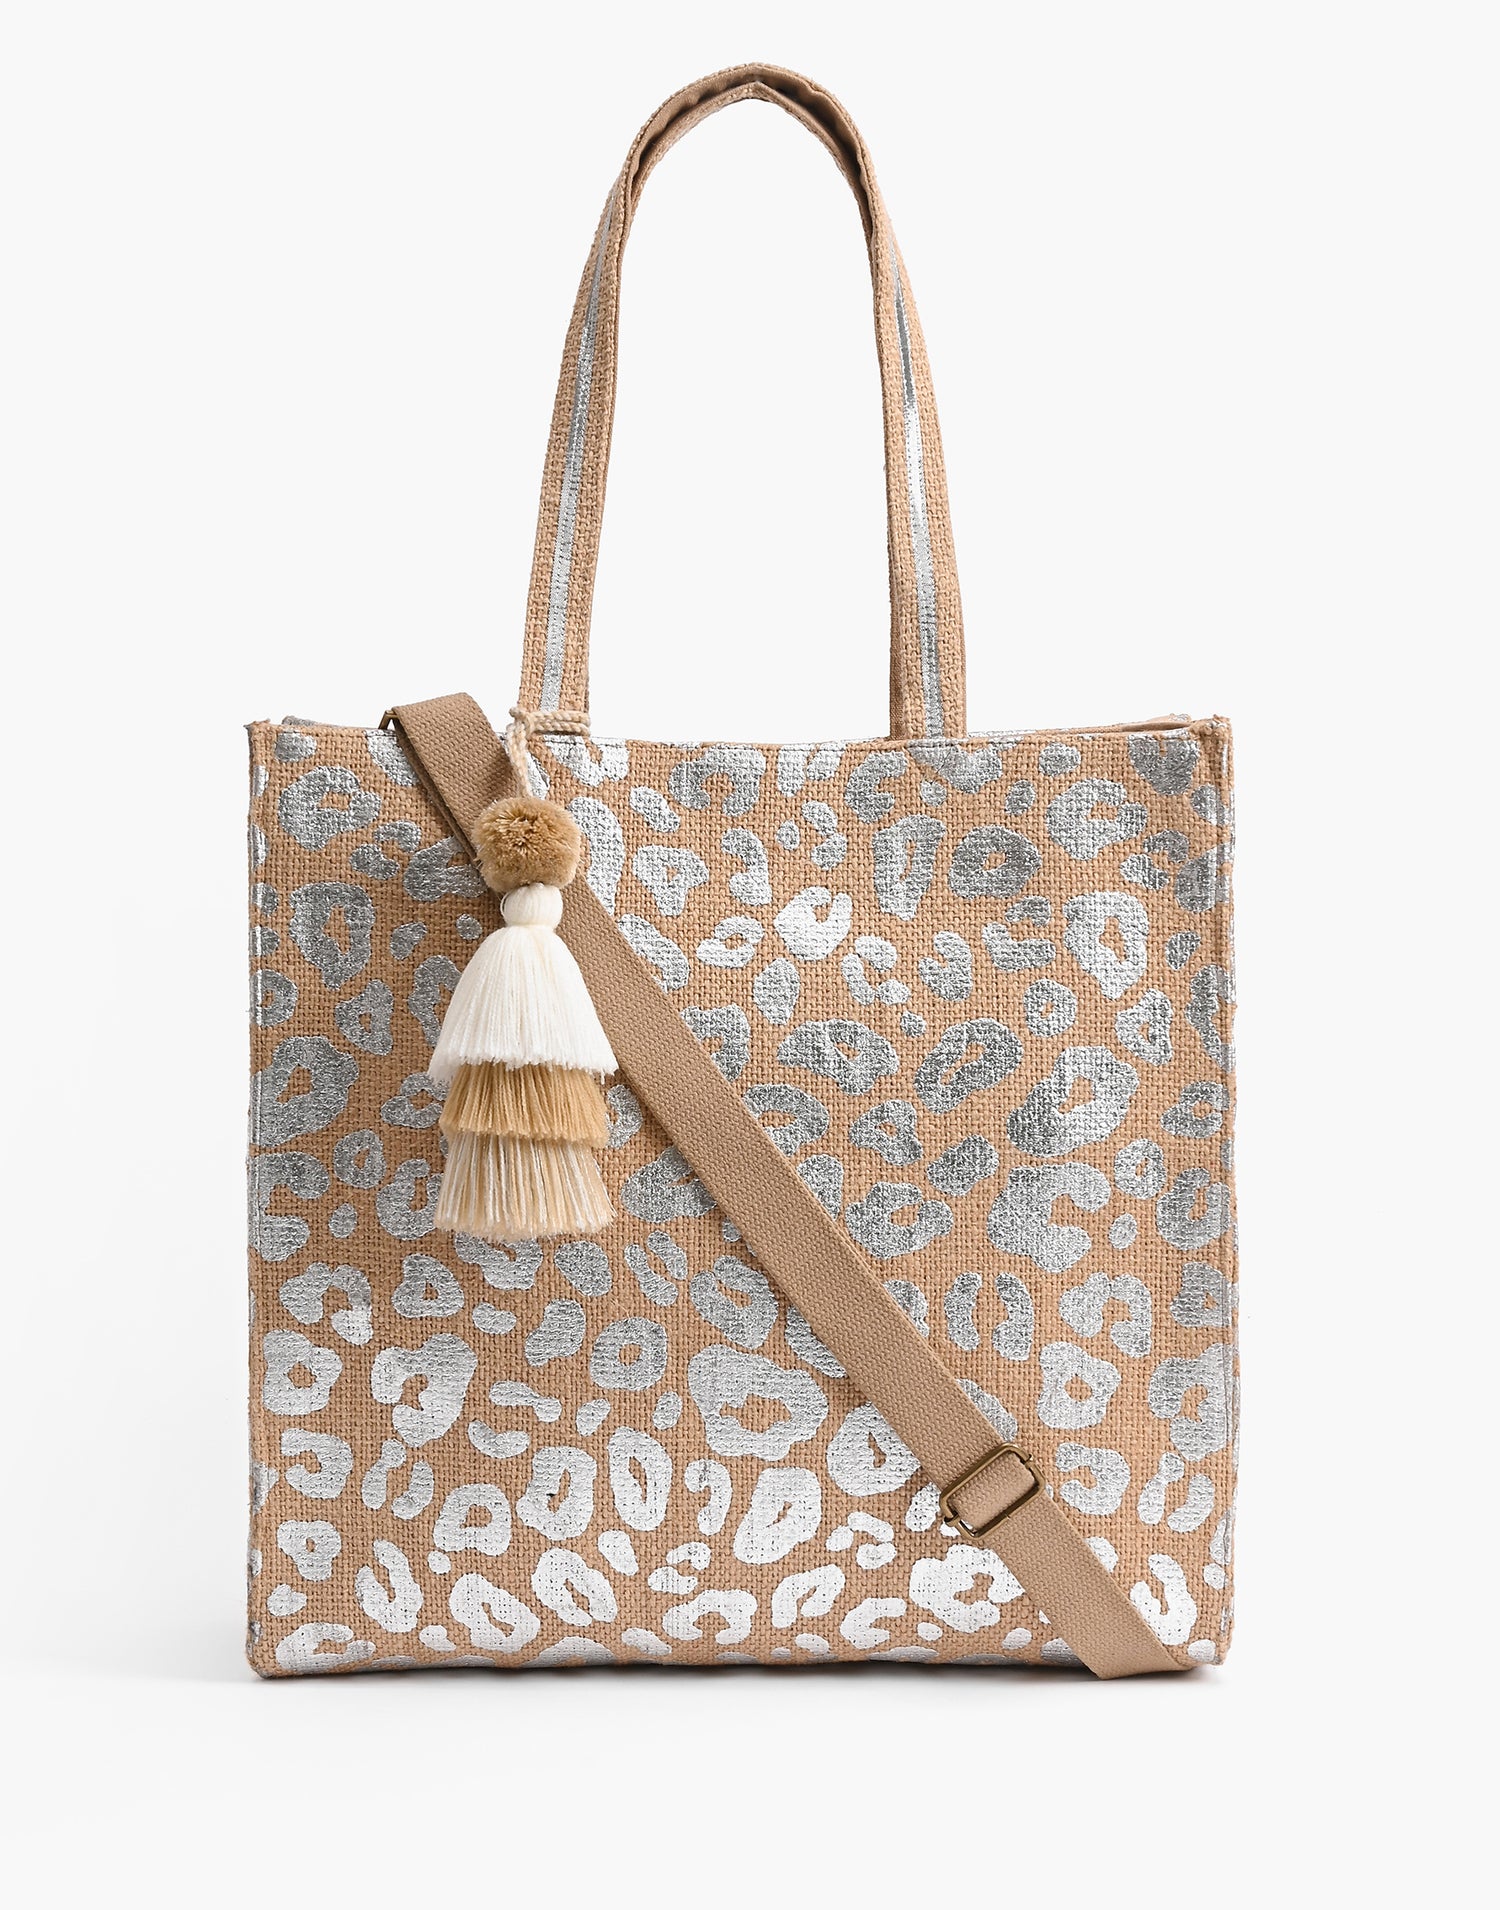 Leopard Handwoven Jute Brown Tote with Tassel by America & Beyond in Silver - Front View